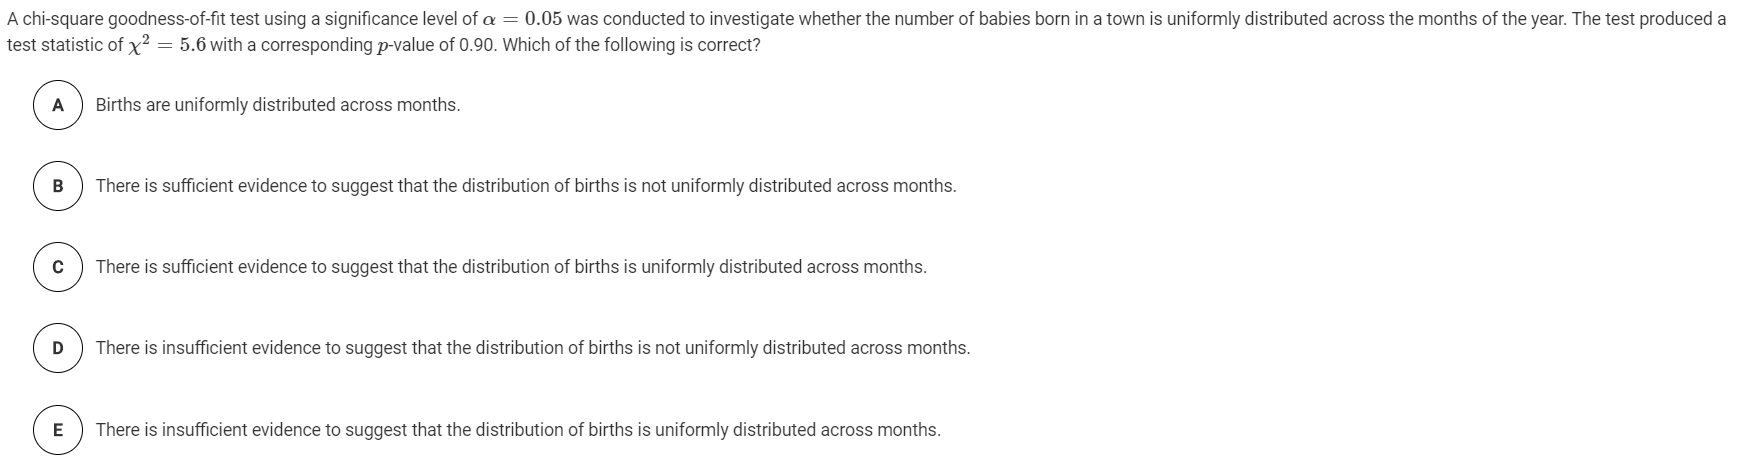 A chi-square goodness-of-fit test using a significance level of a = 0.05 was conducted to investigate whether the number of babies born in a town is uniformly distributed across the months of the year. The test produced a
test statistic of x² = 5.6 with a corresponding p-value of 0.90. Which of the following is correct?
A
Births are uniformly distributed across months.
There is sufficient evidence to suggest that the distribution of births is not uniformly distributed across months.
C
There is sufficient evidence to suggest that the distribution of births is uniformly distributed across months.
There is insufficient evidence to suggest that the distribution of births is not uniformly distributed across months.
E
There is insufficient evidence to suggest that the distribution of births is uniformly distributed across months.
